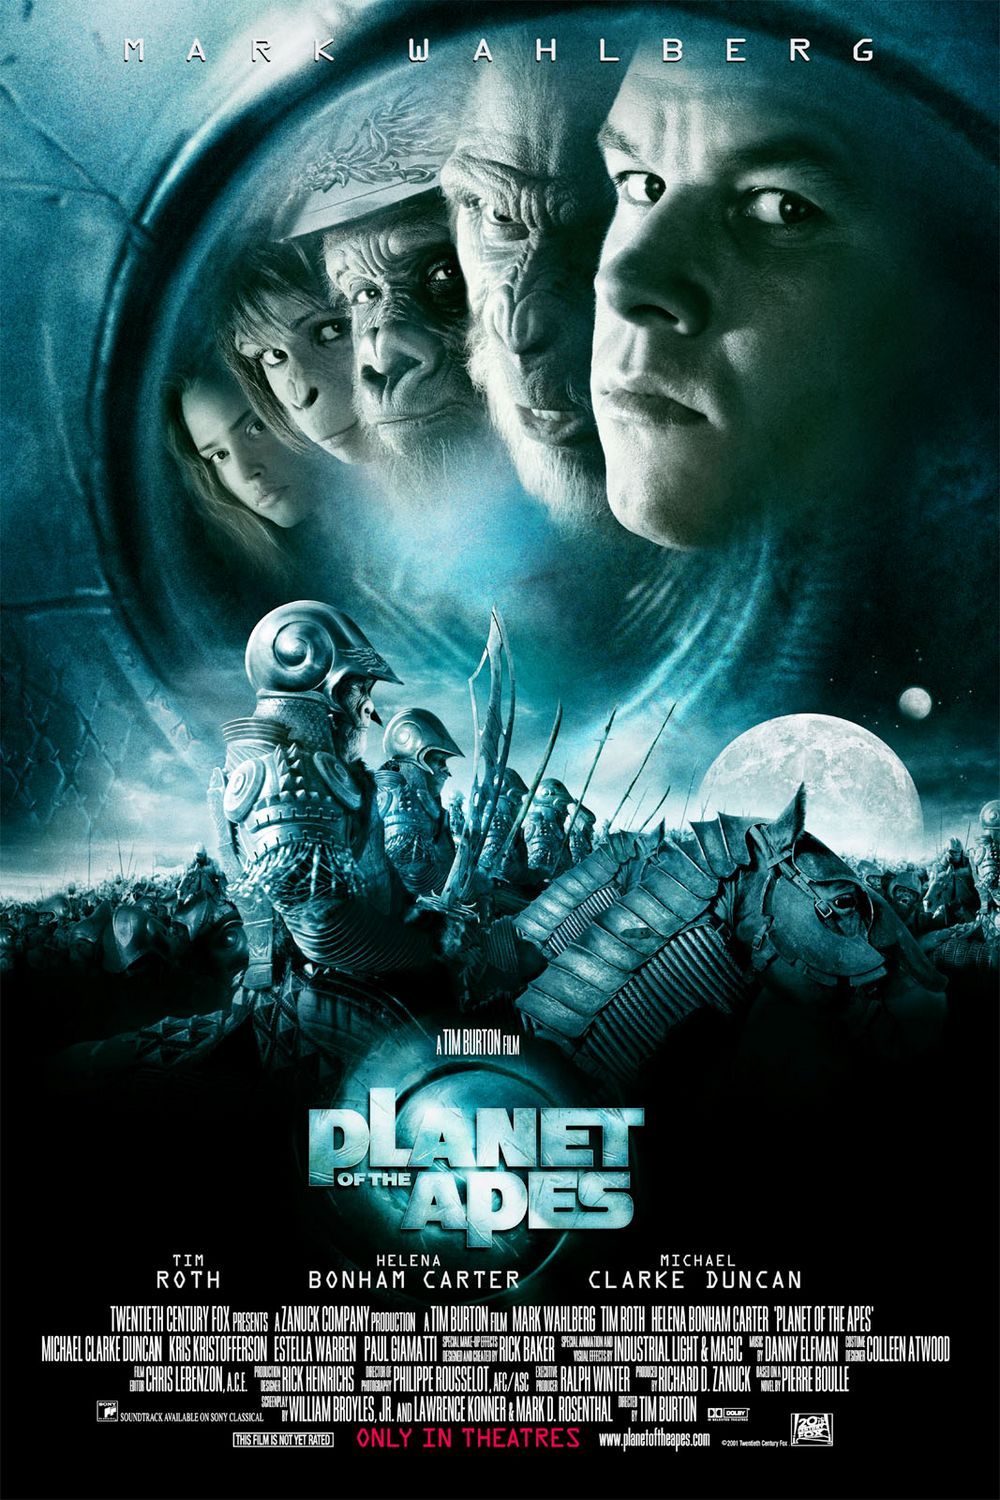 Planet of the Apes (2001) Posters (8 of 8)